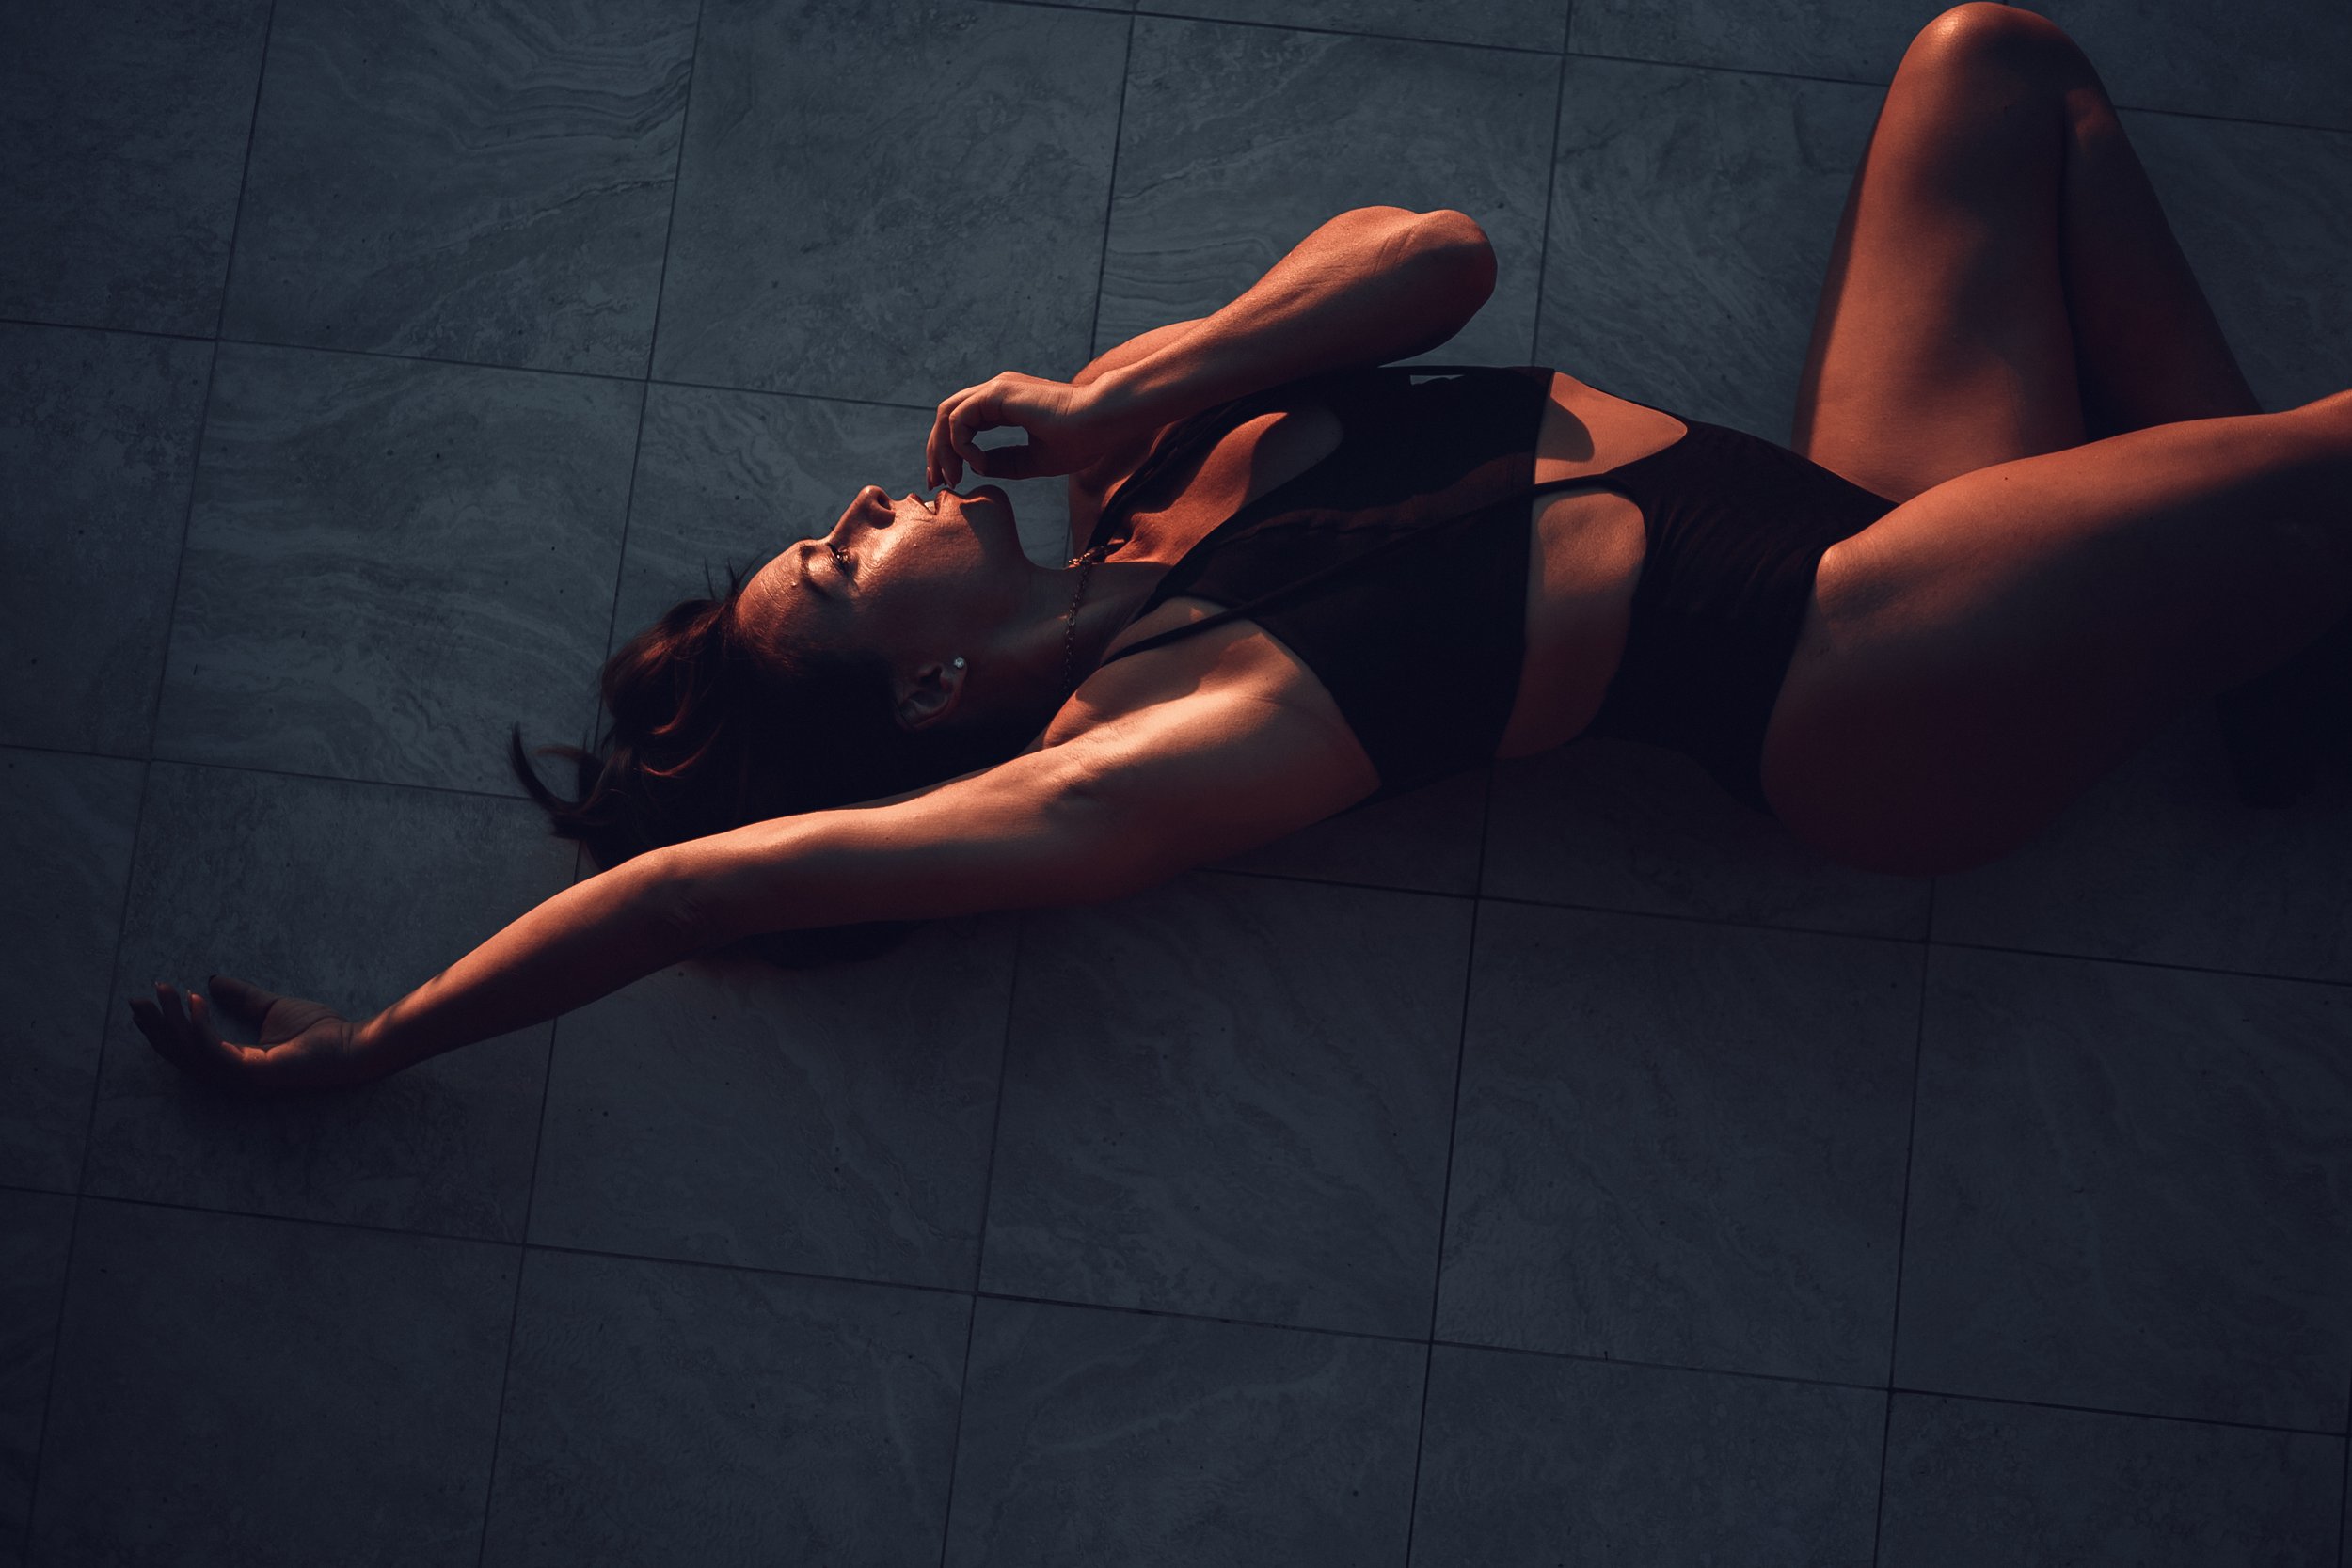 Dramatic Lounging on tile